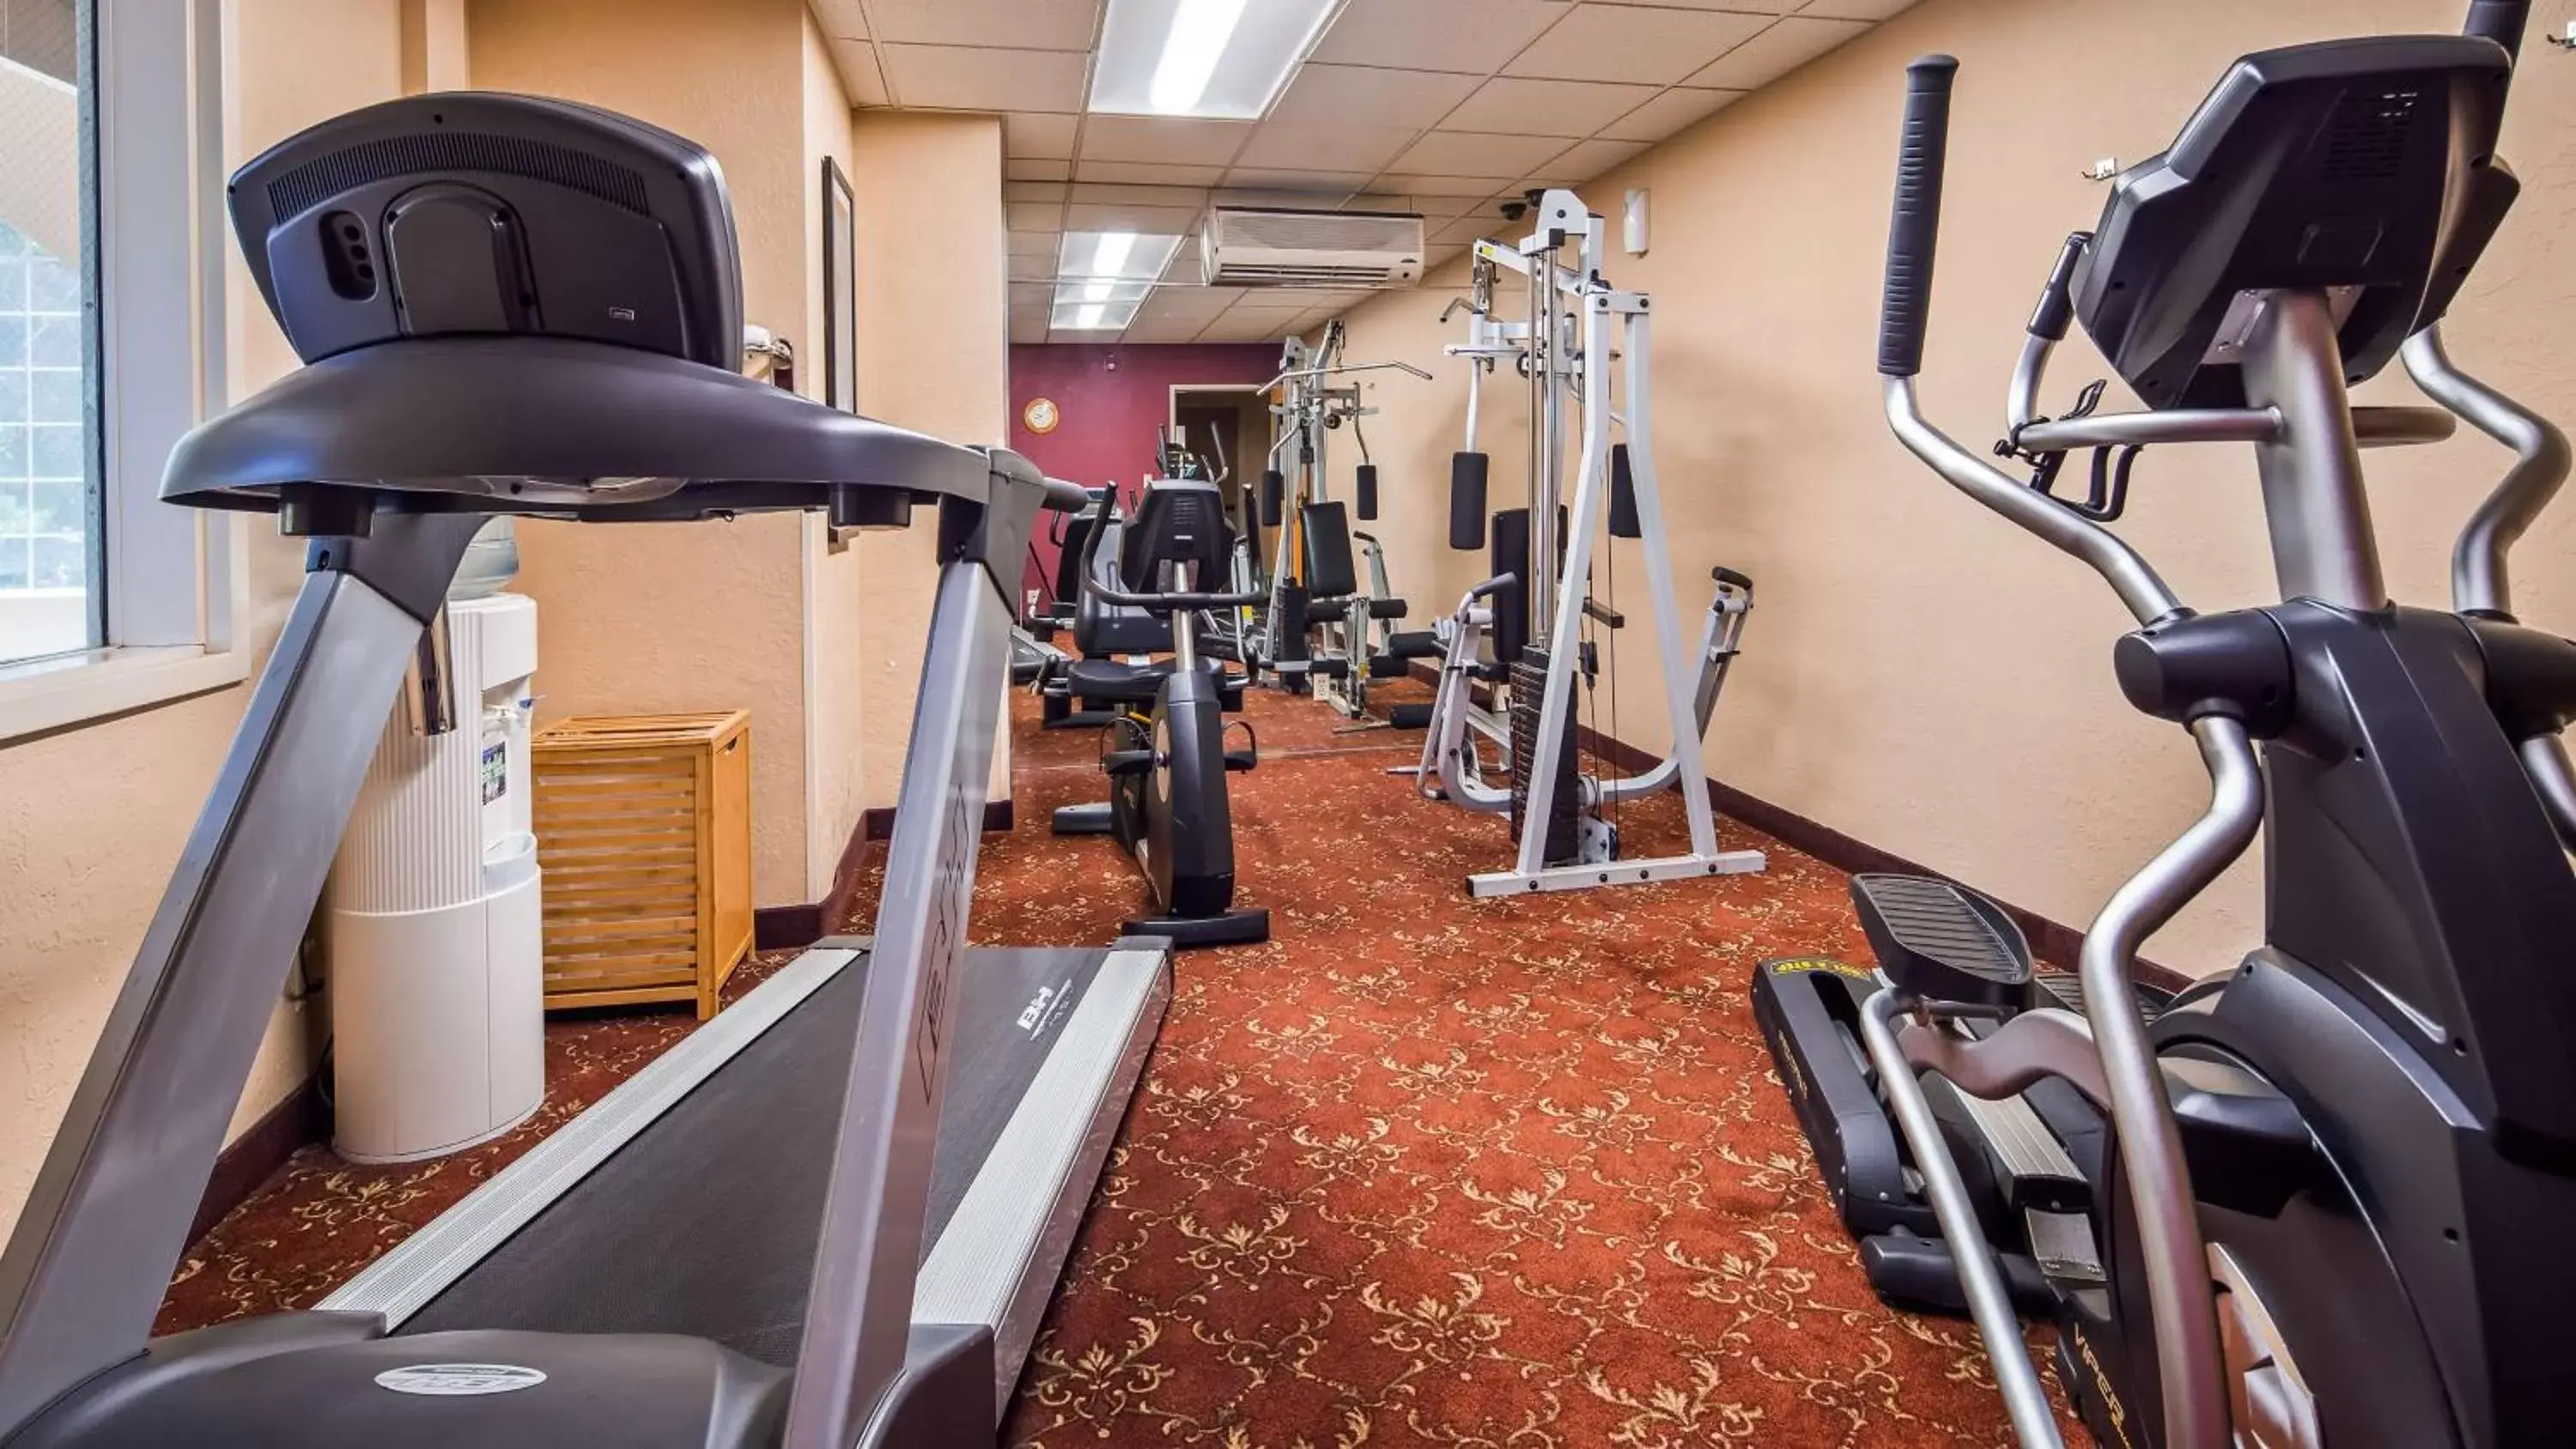 Fitness centre/facilities, Fitness Center/Facilities in Best Western Plus Caldwell Inn & Suites